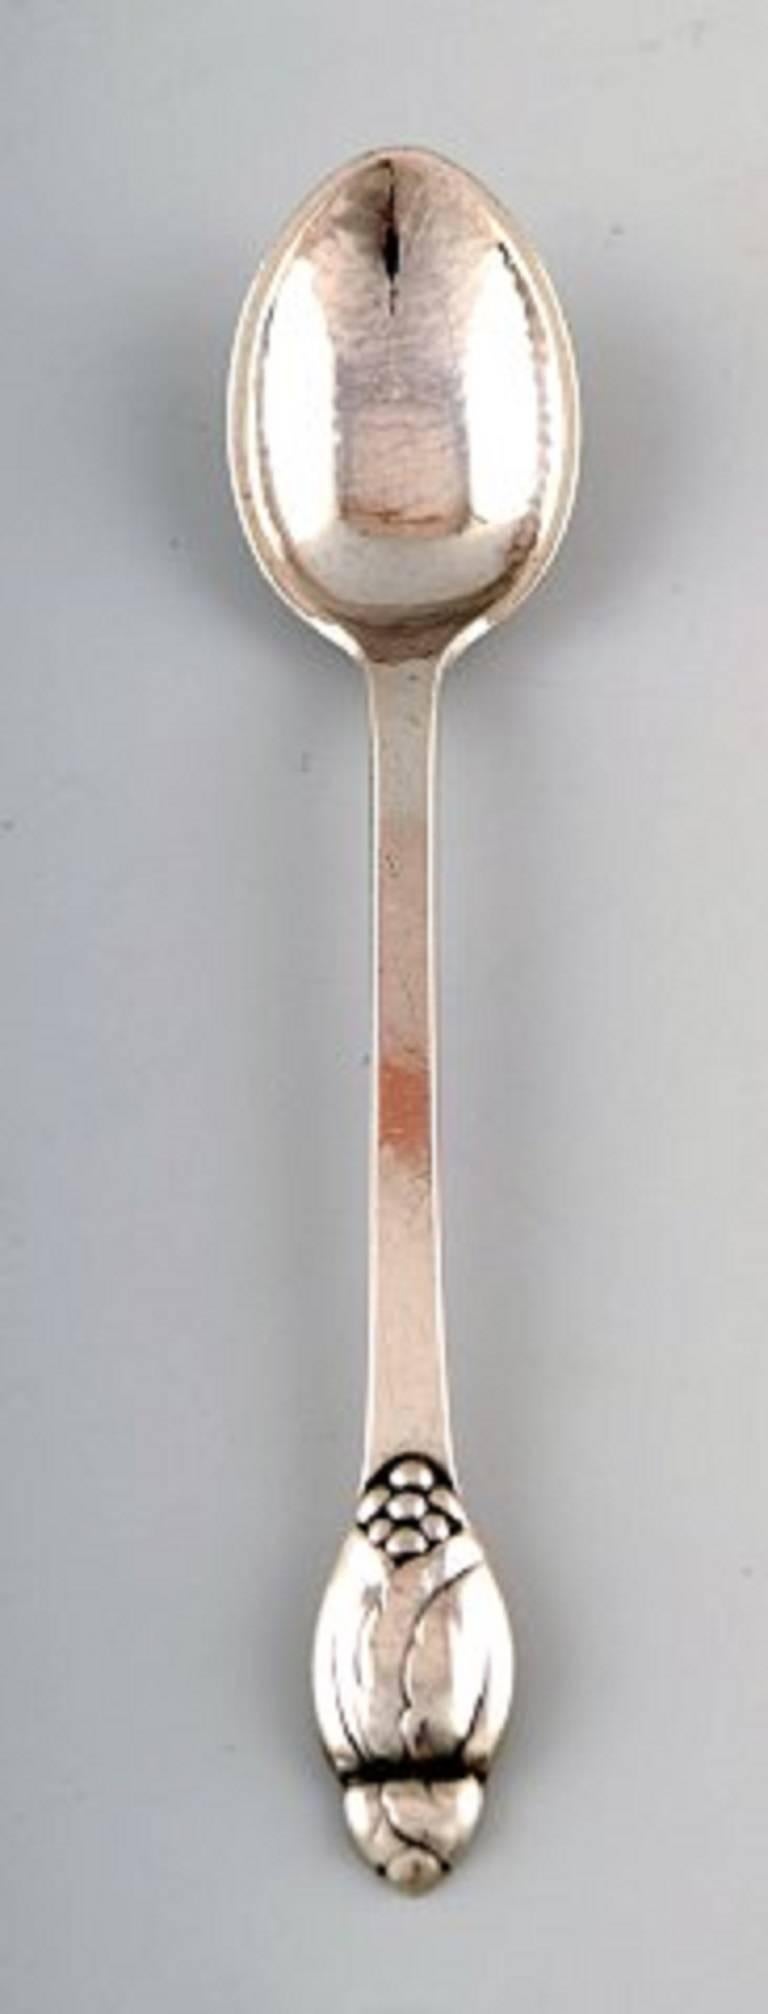 Evald Nielsen number 6, teaspoon in silver.
Seven spoons in stock.
Denmark 1920s-1930s.
Measures 11 cm.
Stamped.
In perfect condition.